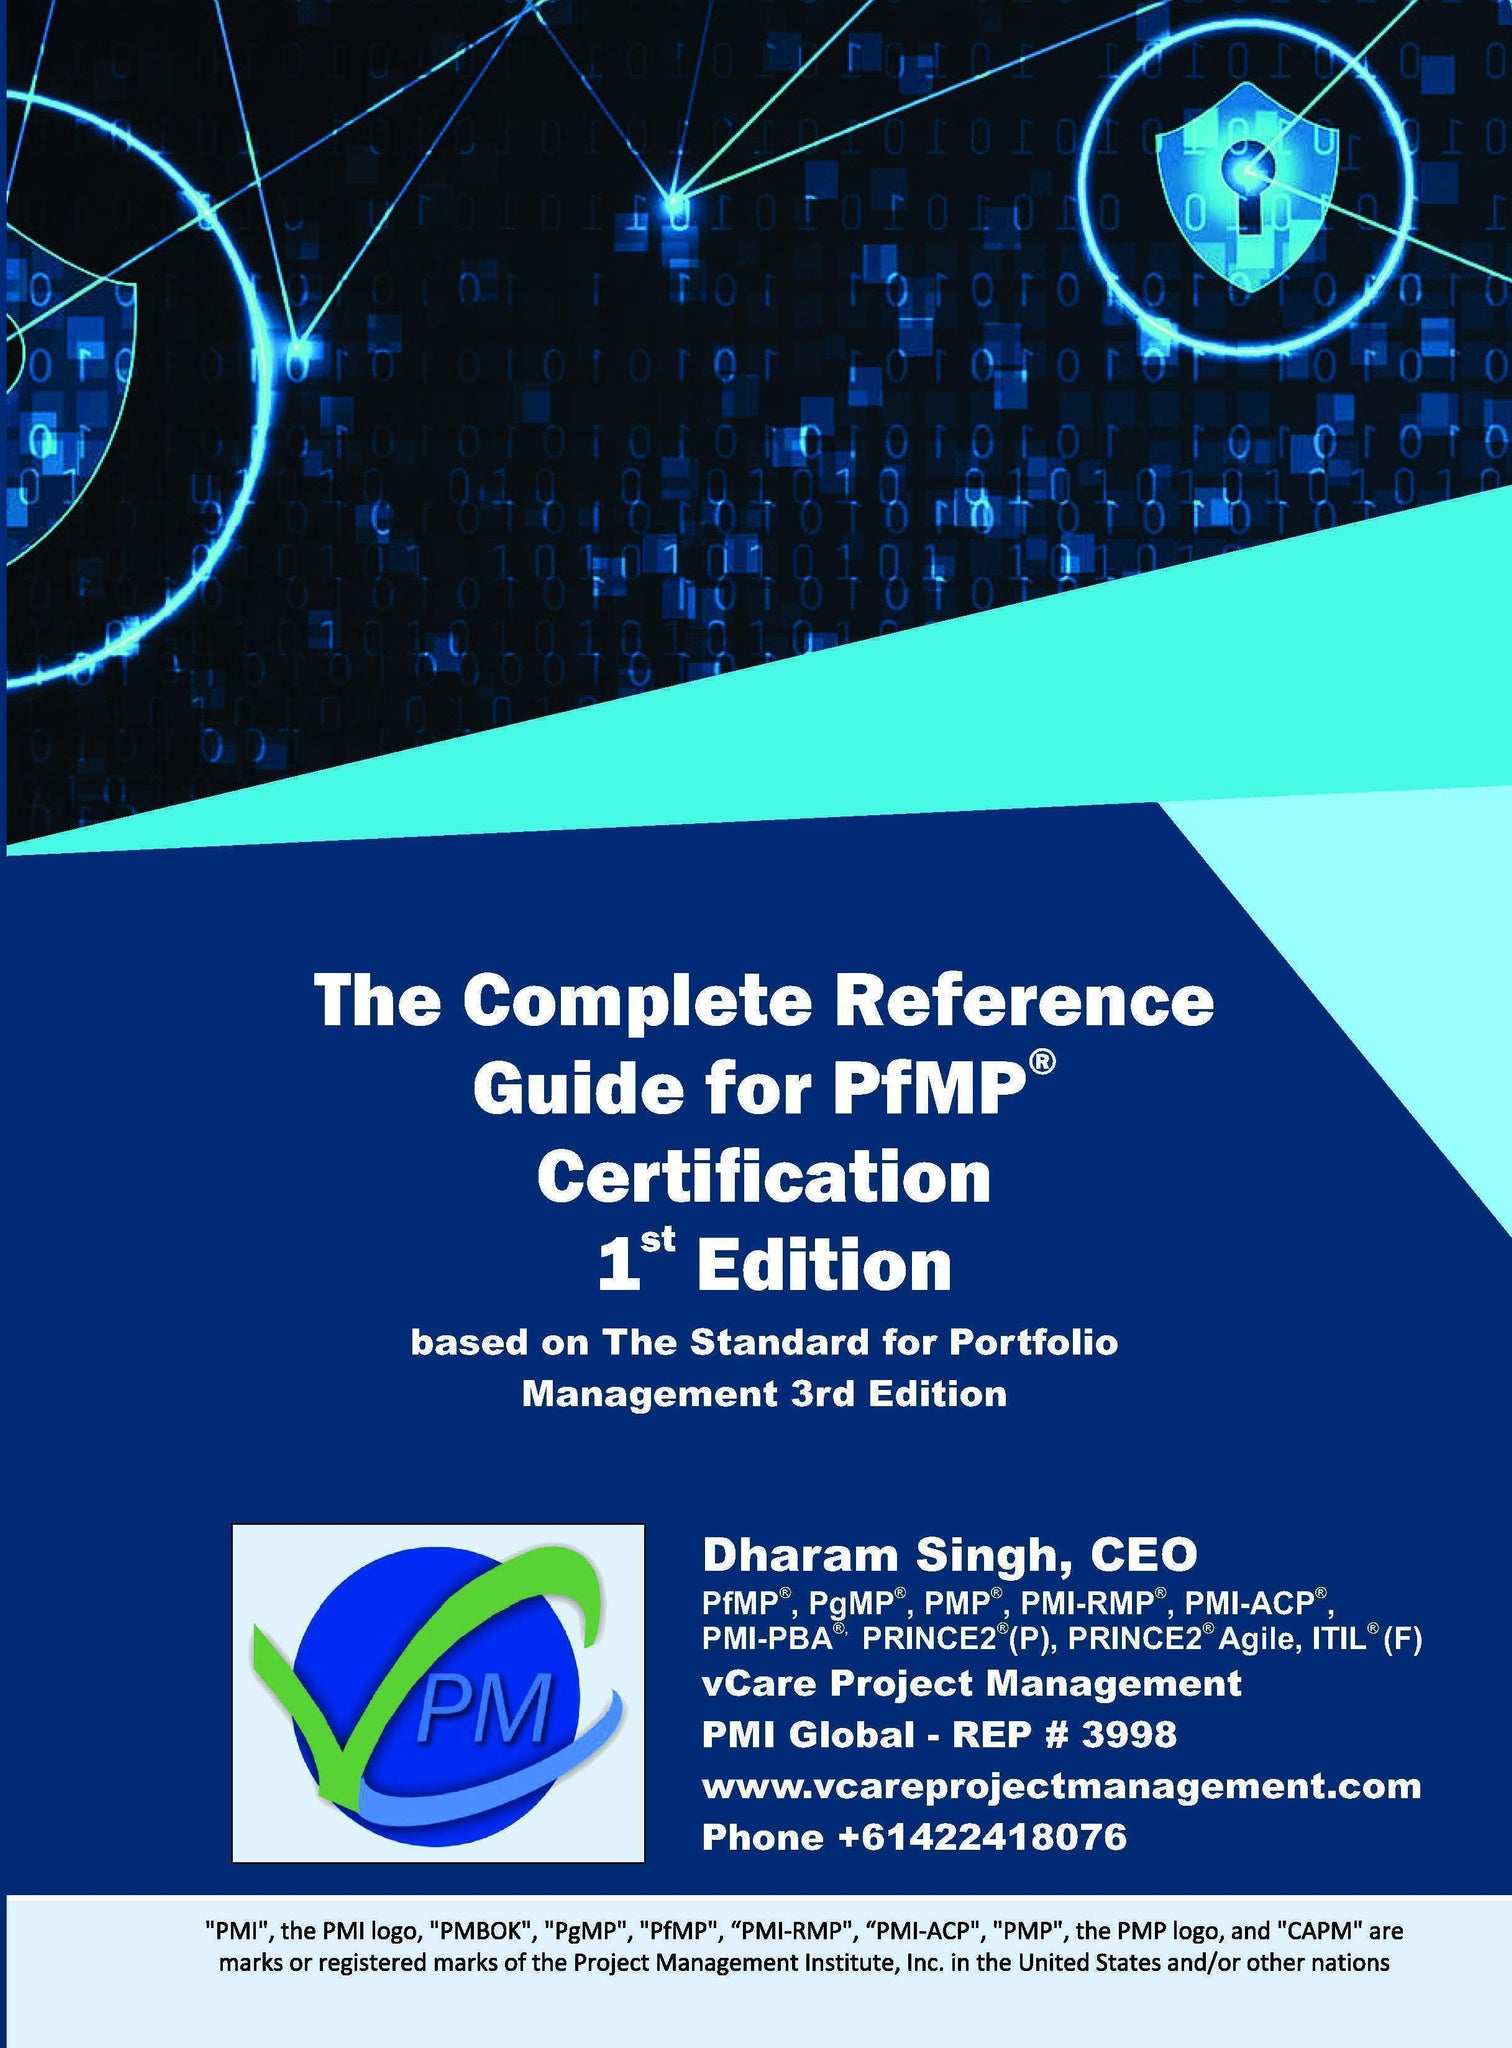 The Complete Reference Guide for PfMP® Certification | 1st Edition (based on Standard for Portfolio Management 3rd Edition)